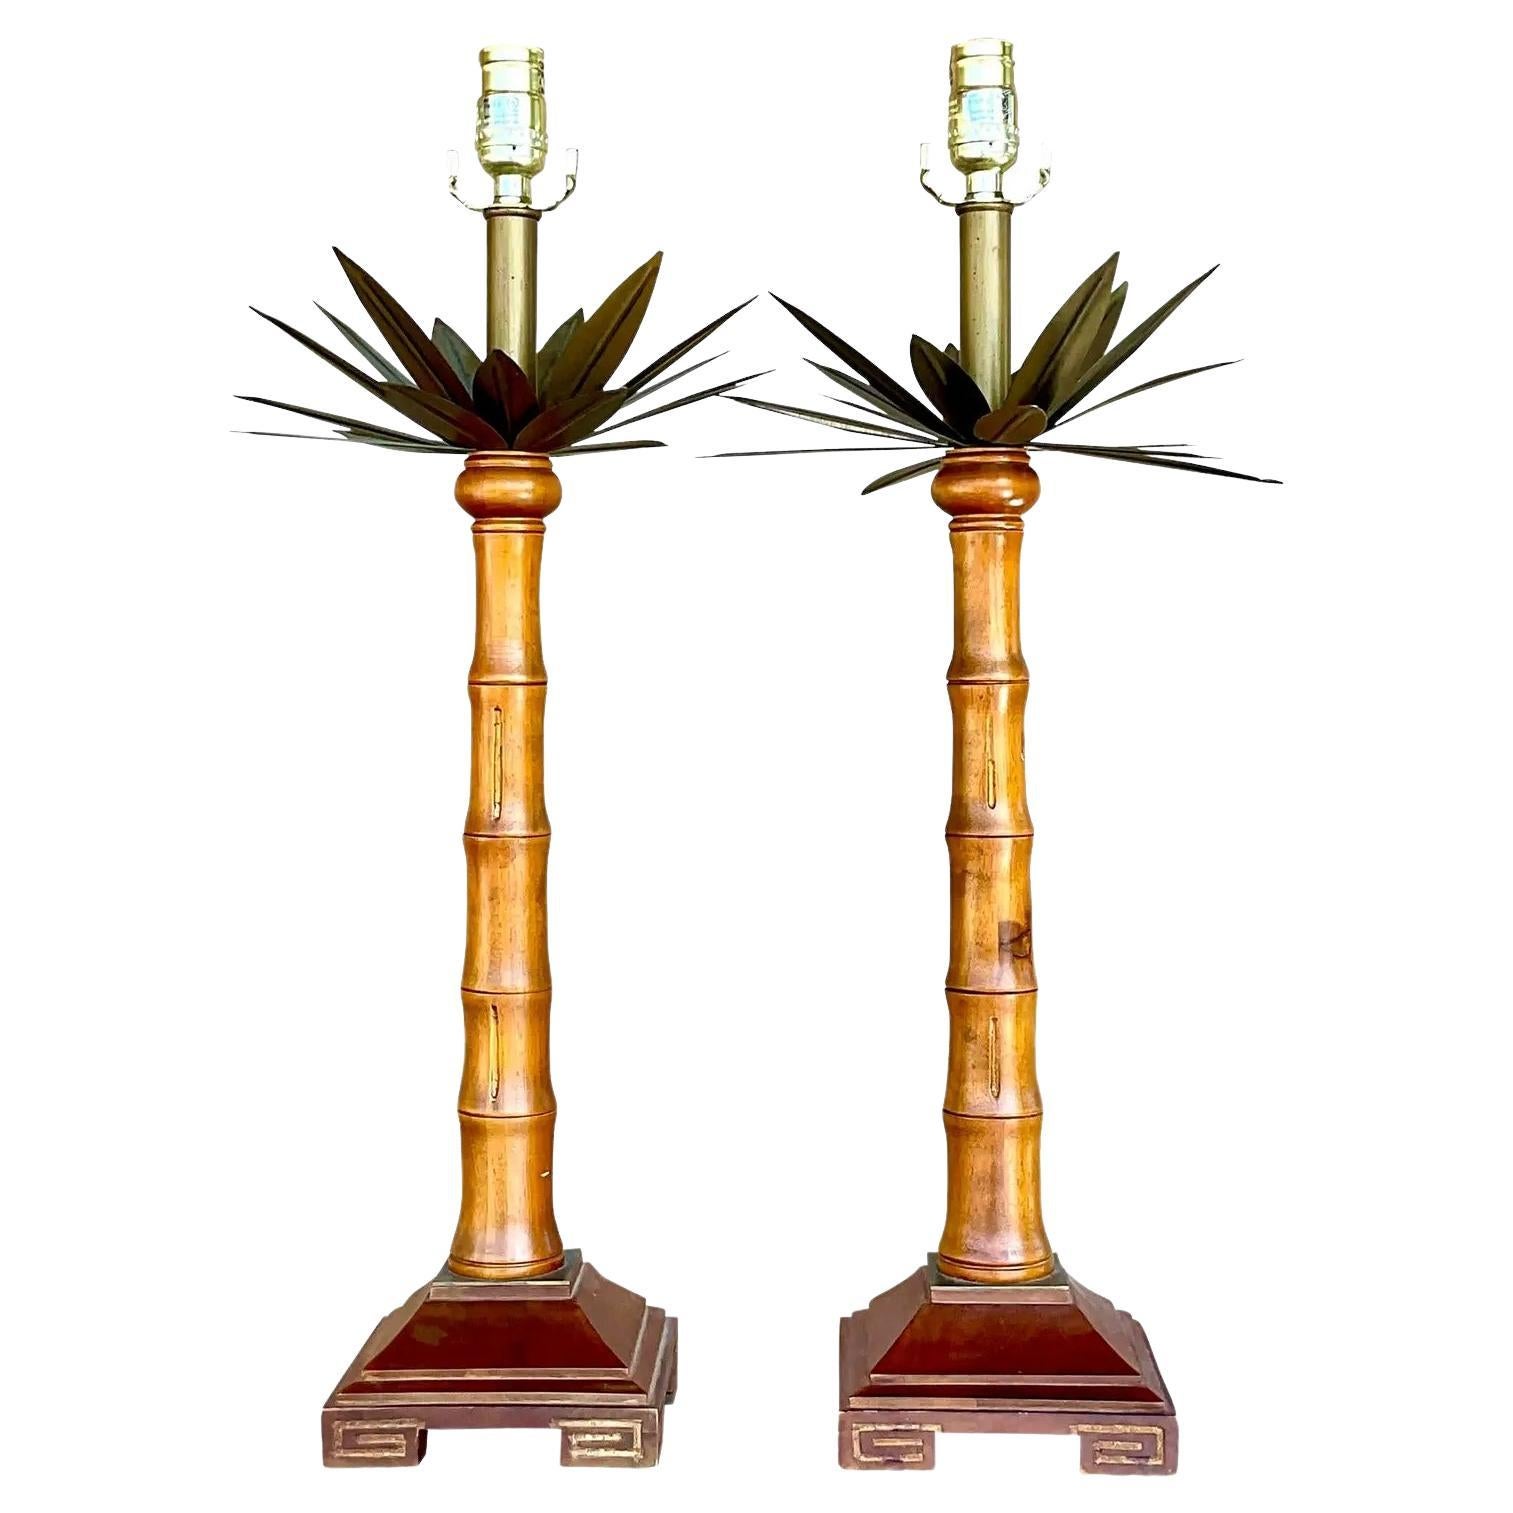 Vintage Coastal Brass and Wood Palm Tree Table Lamps - a Pair